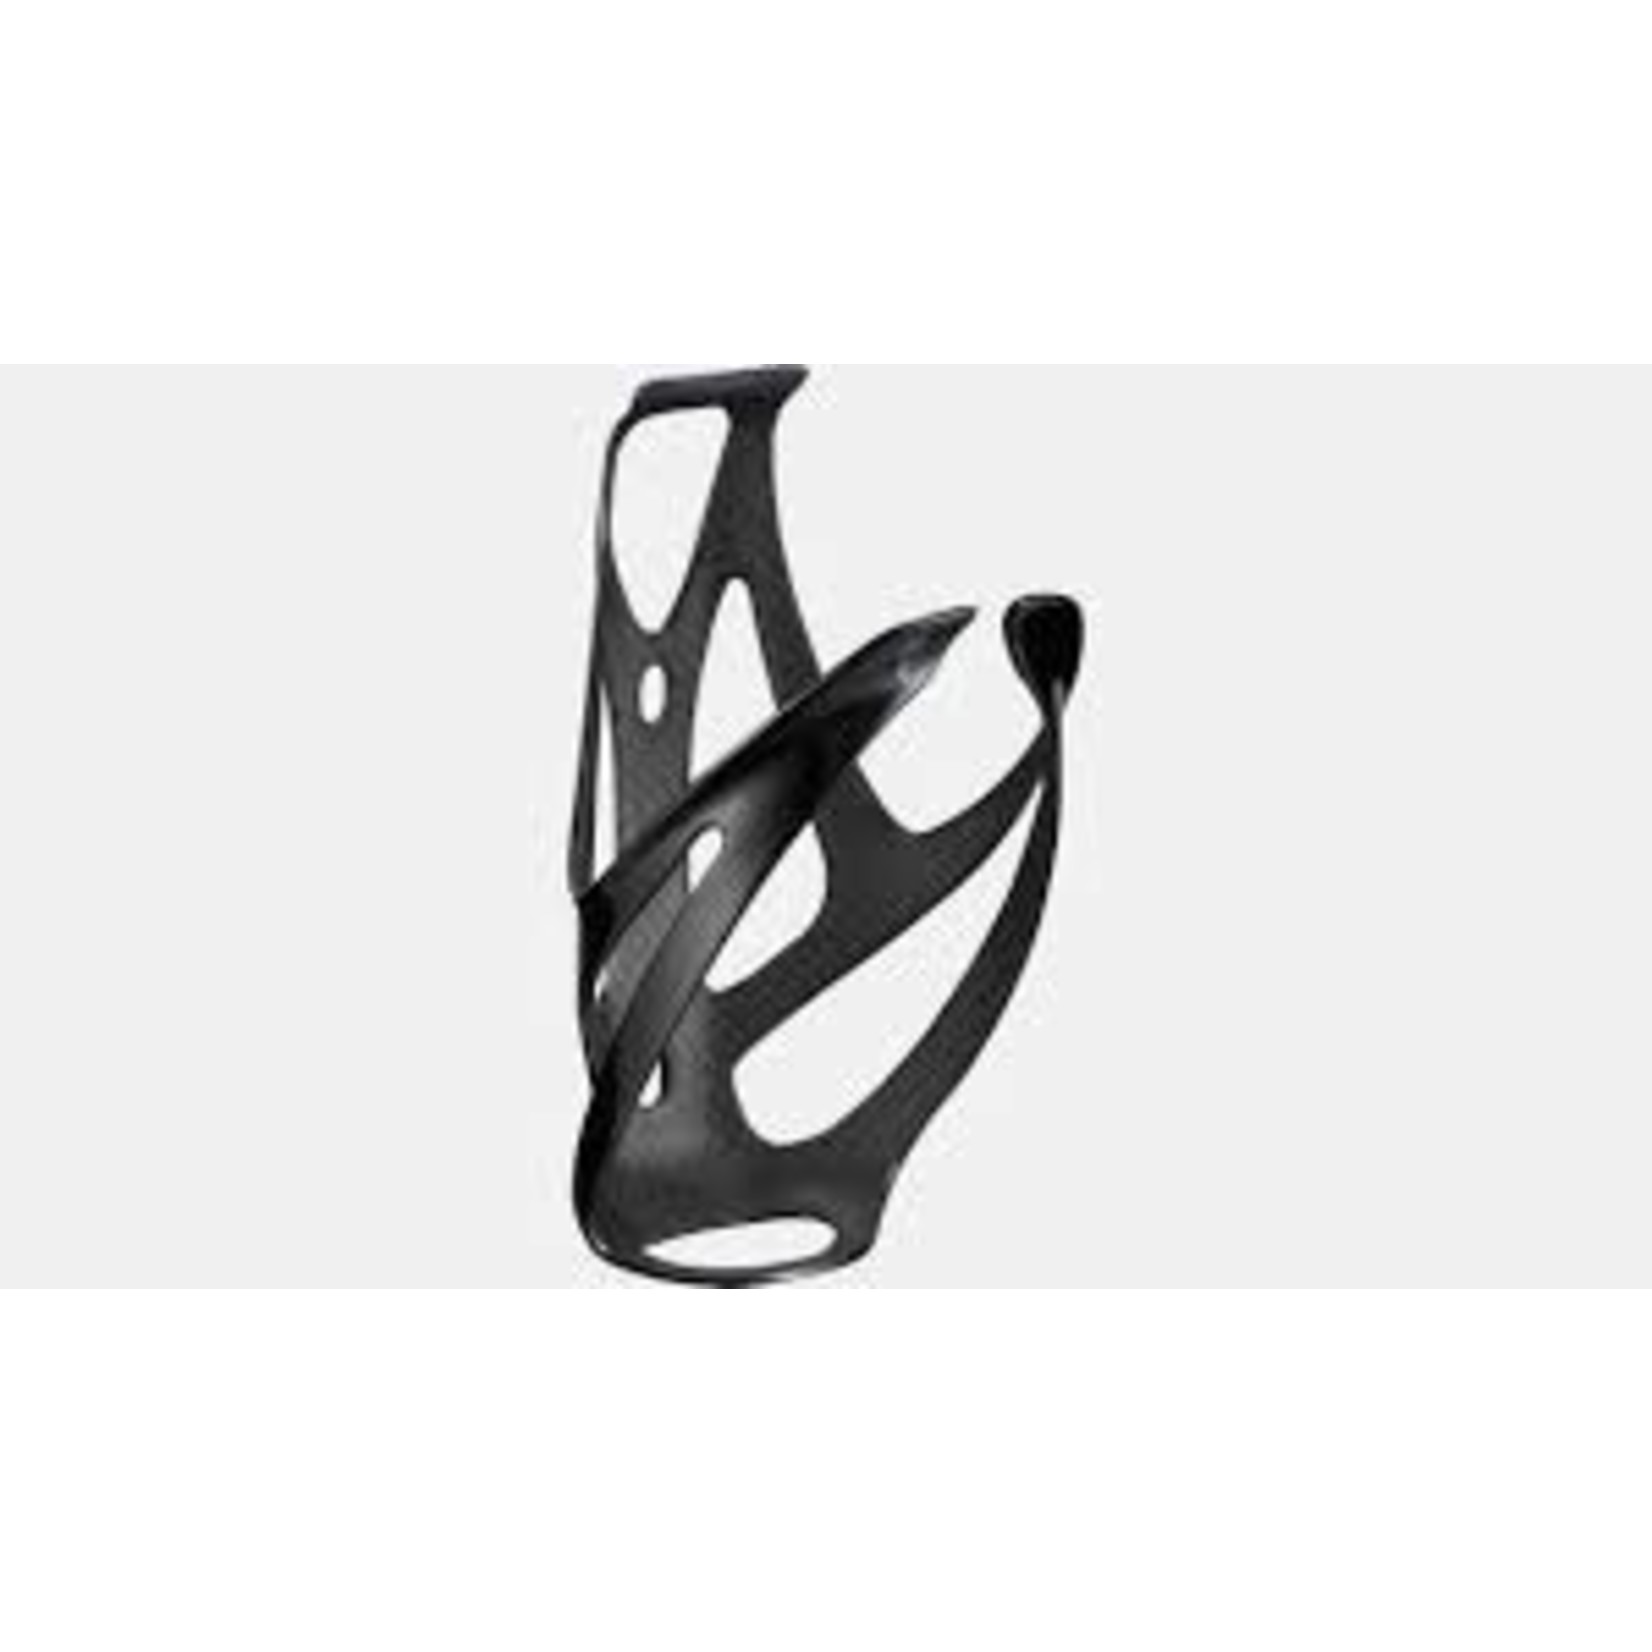 Specialized S-Works Rib Cage III Carbon Bottle Cage